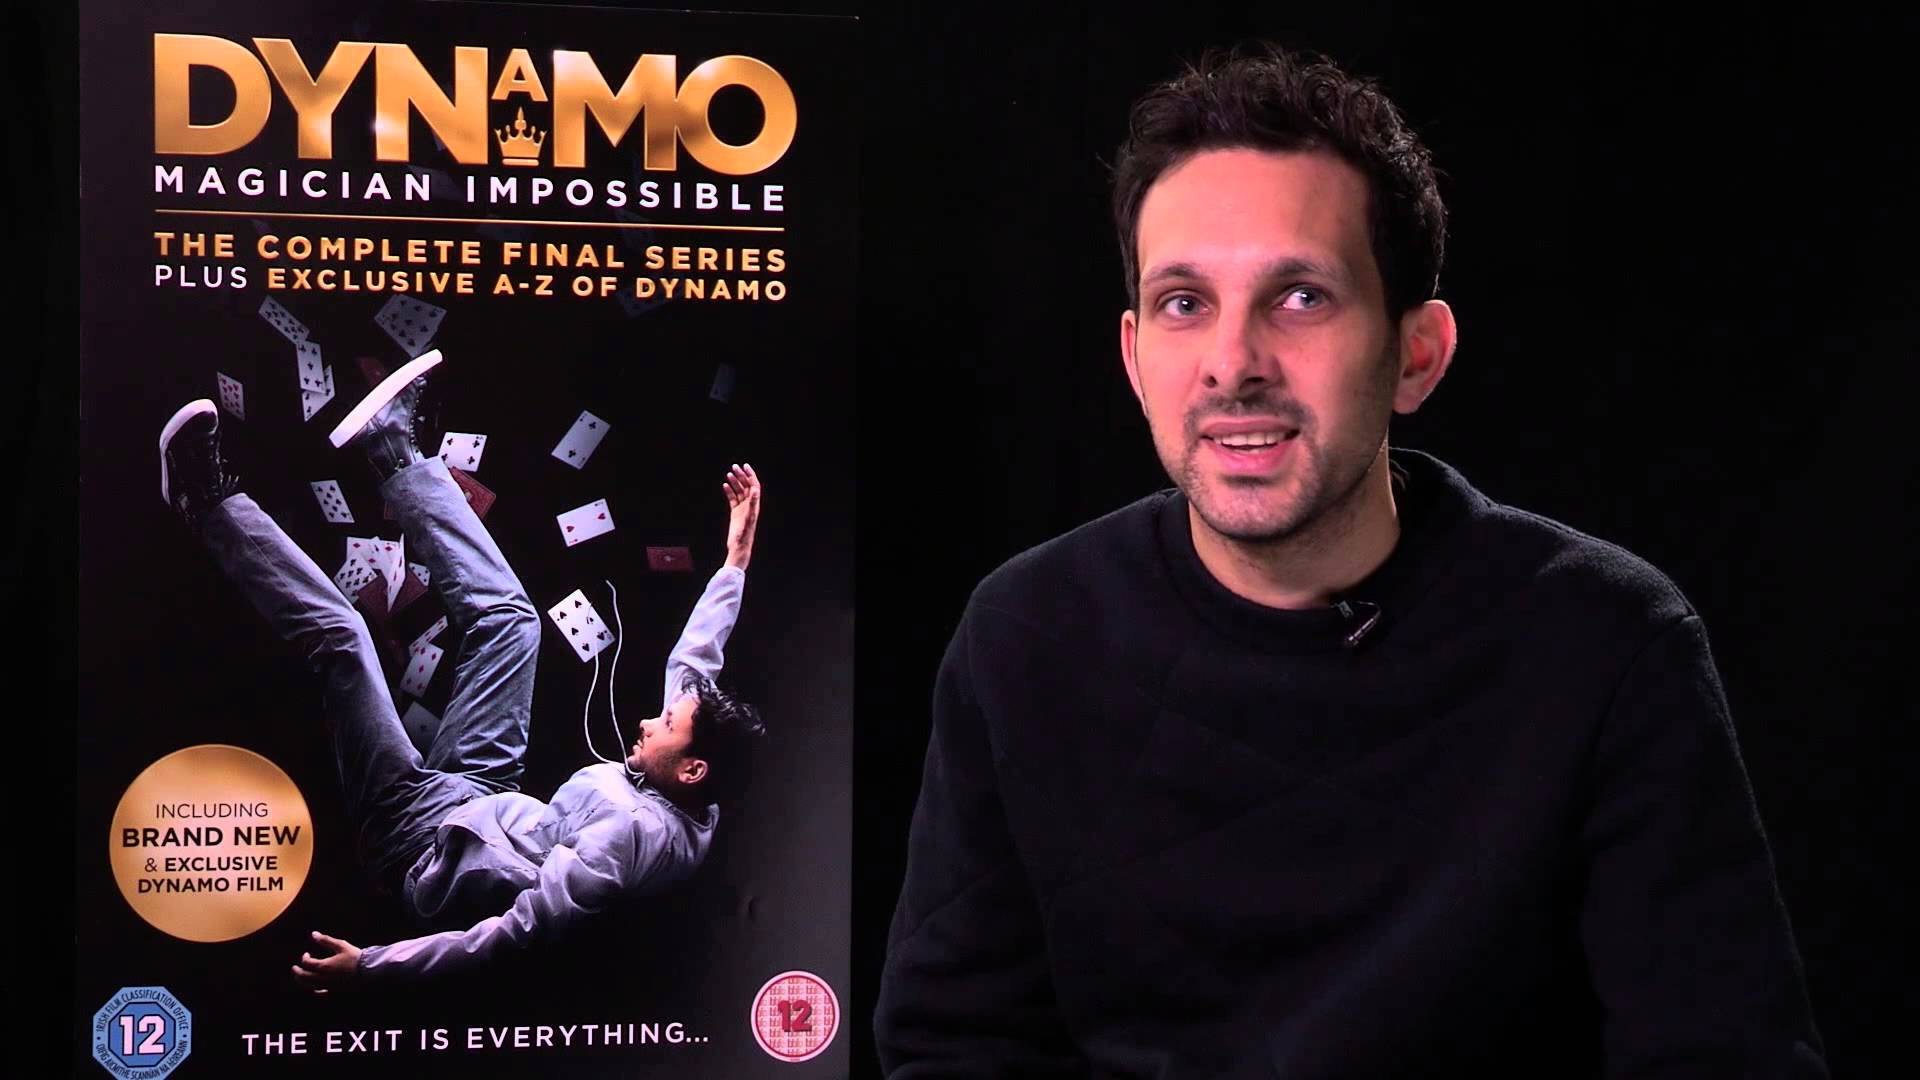 Dynamo: Magician Impossible The Complete Final Series